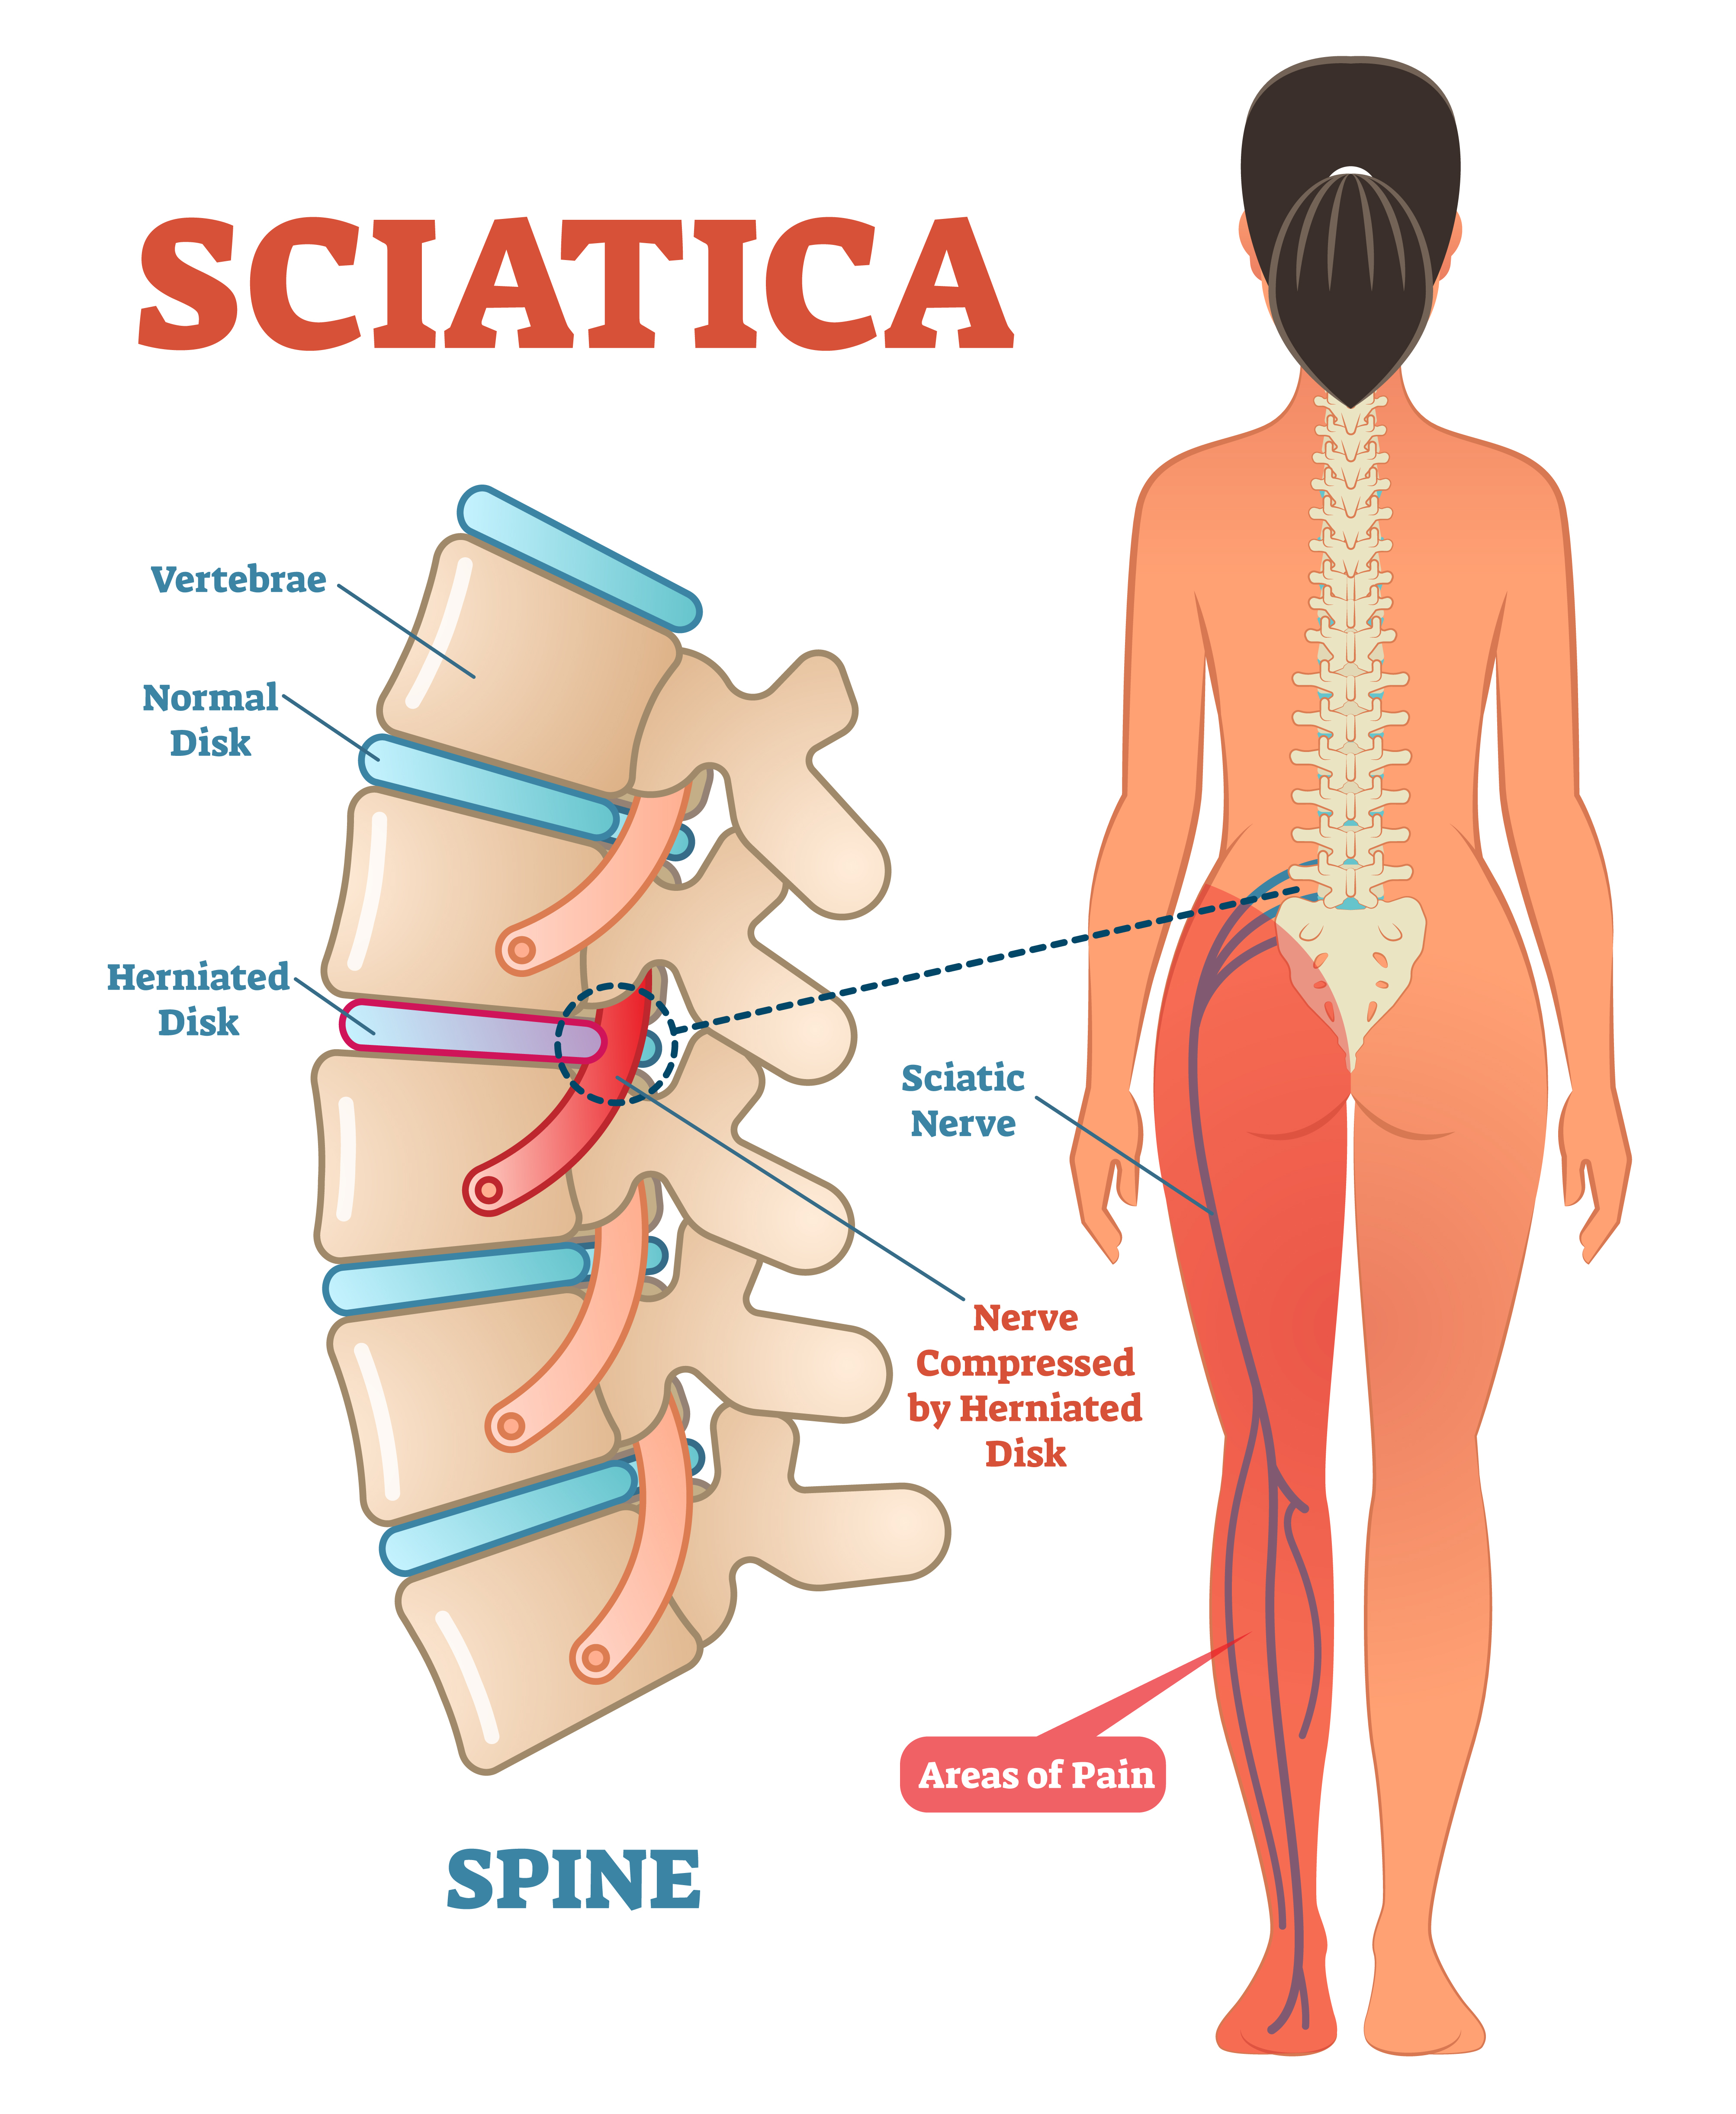 How does Sciatica look like?